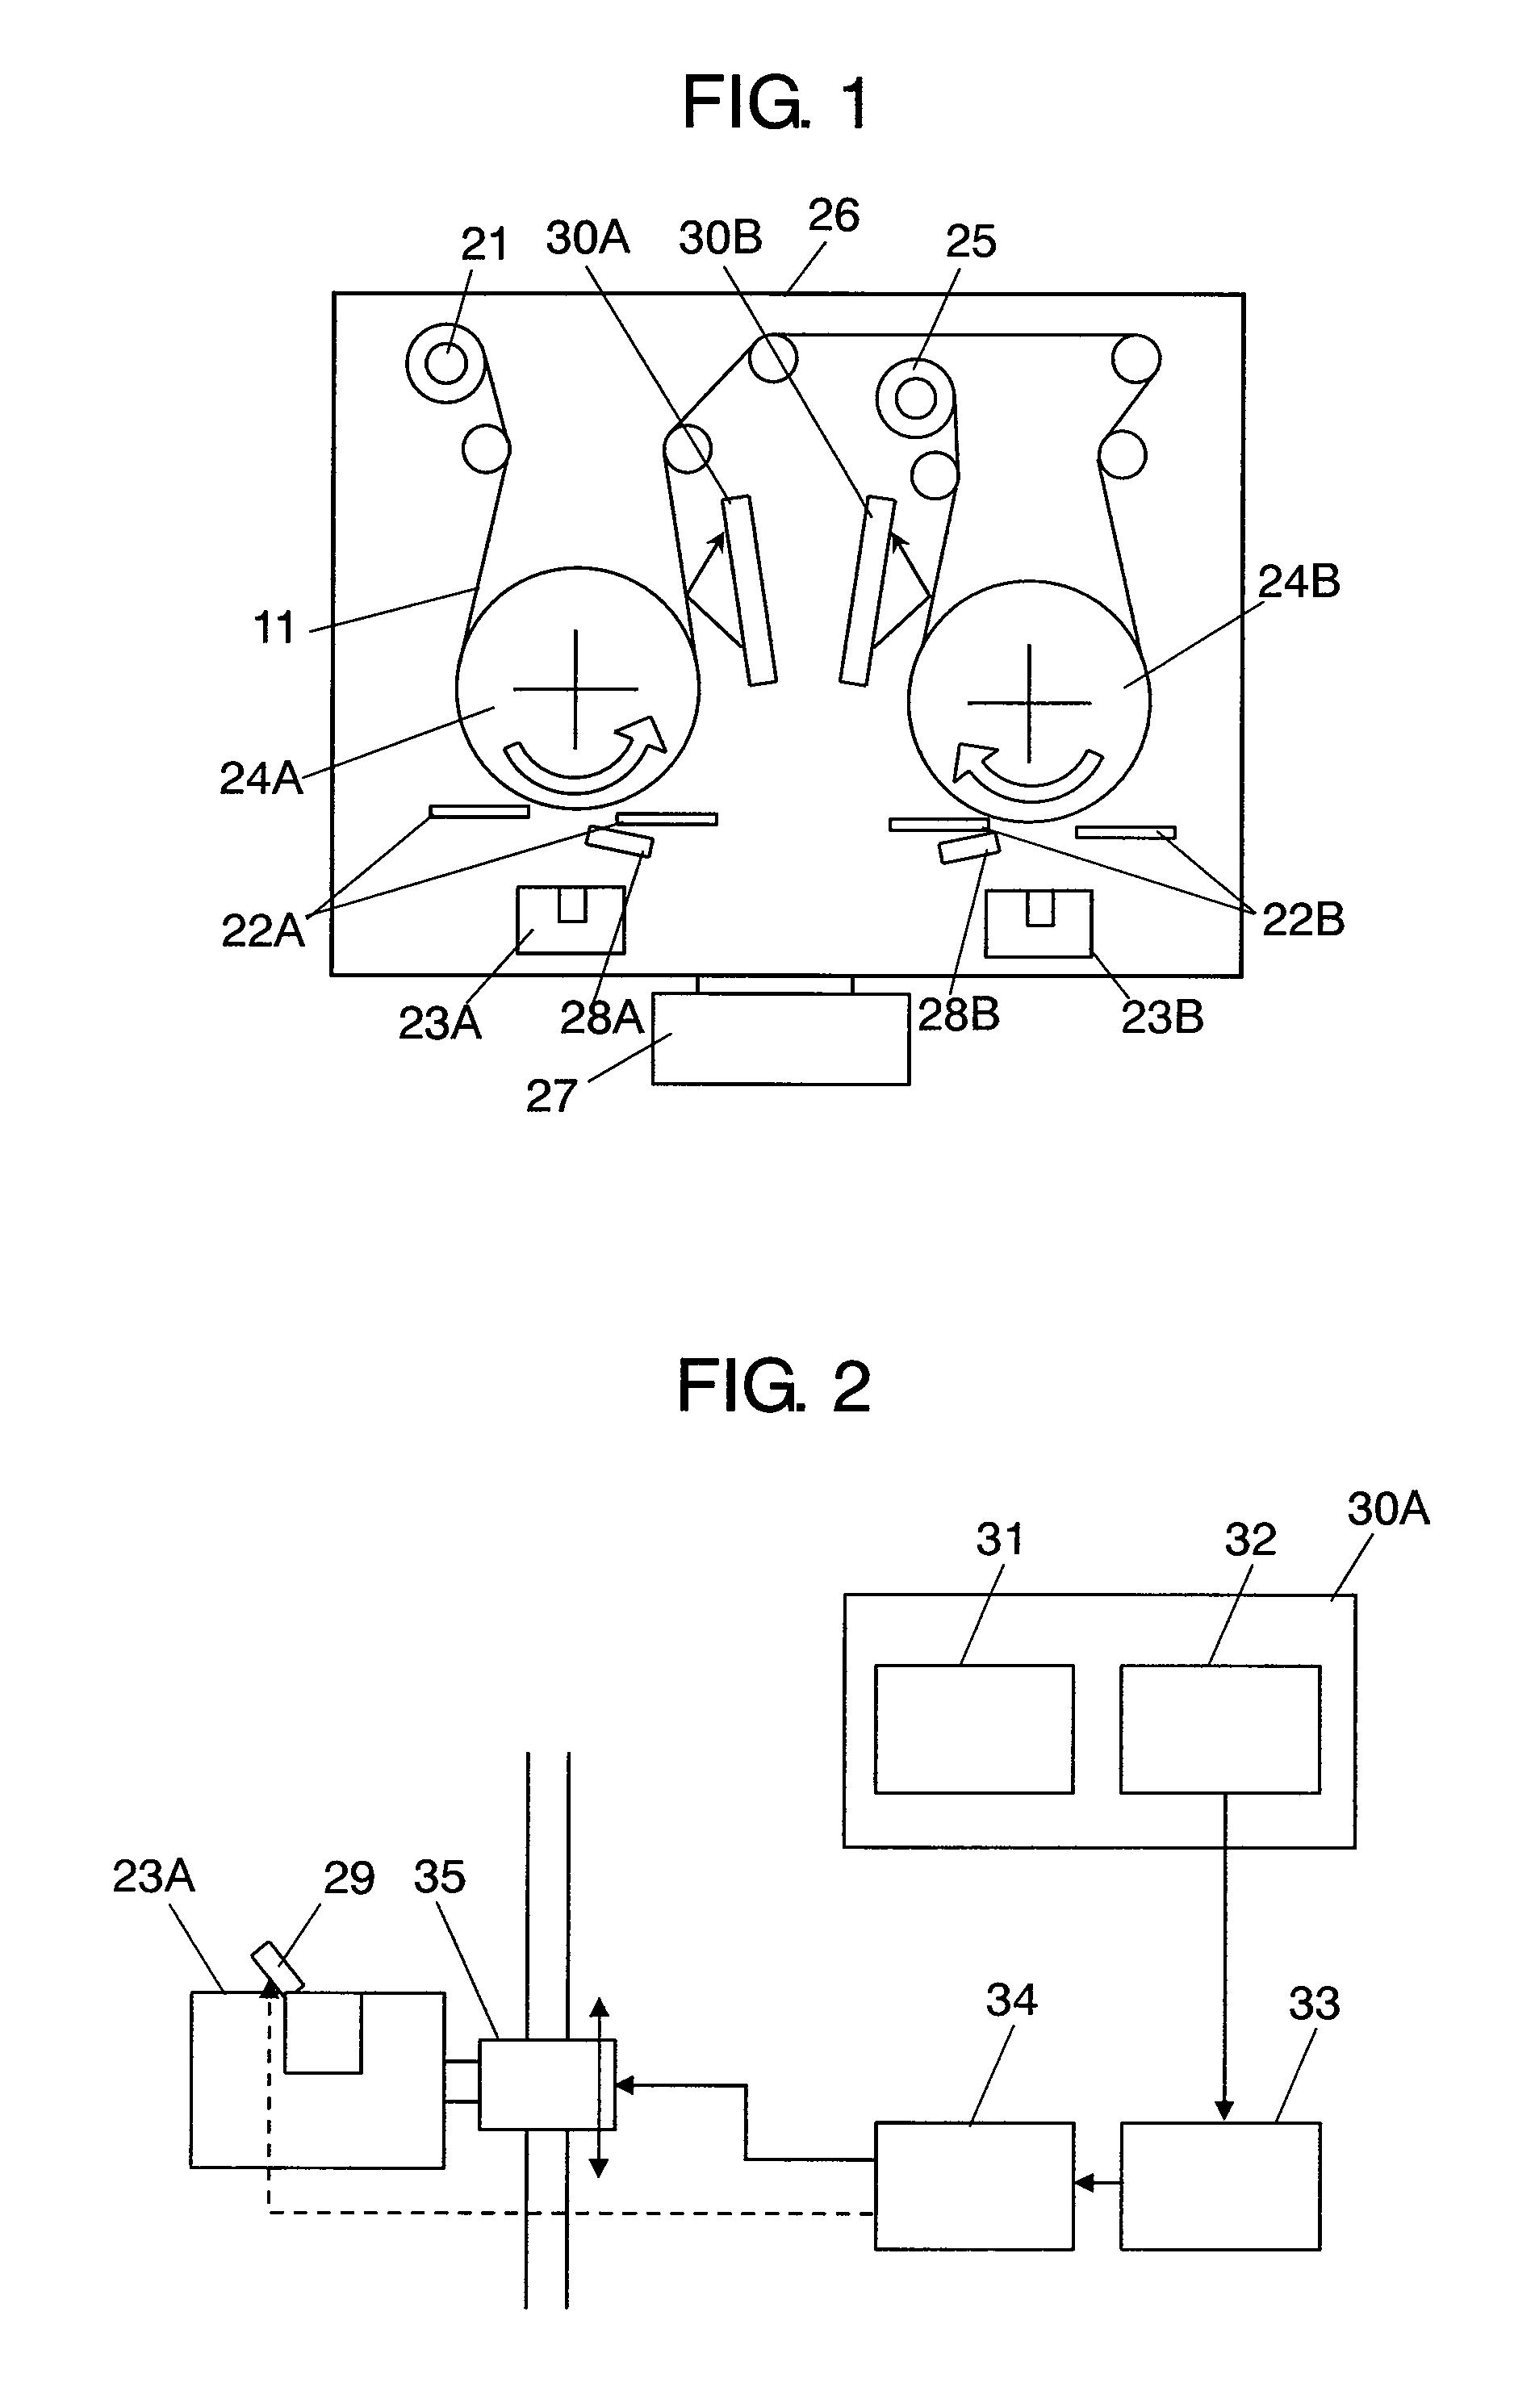 Method for forming active material on a current collector of negative electrode using feedback process with measuring collector